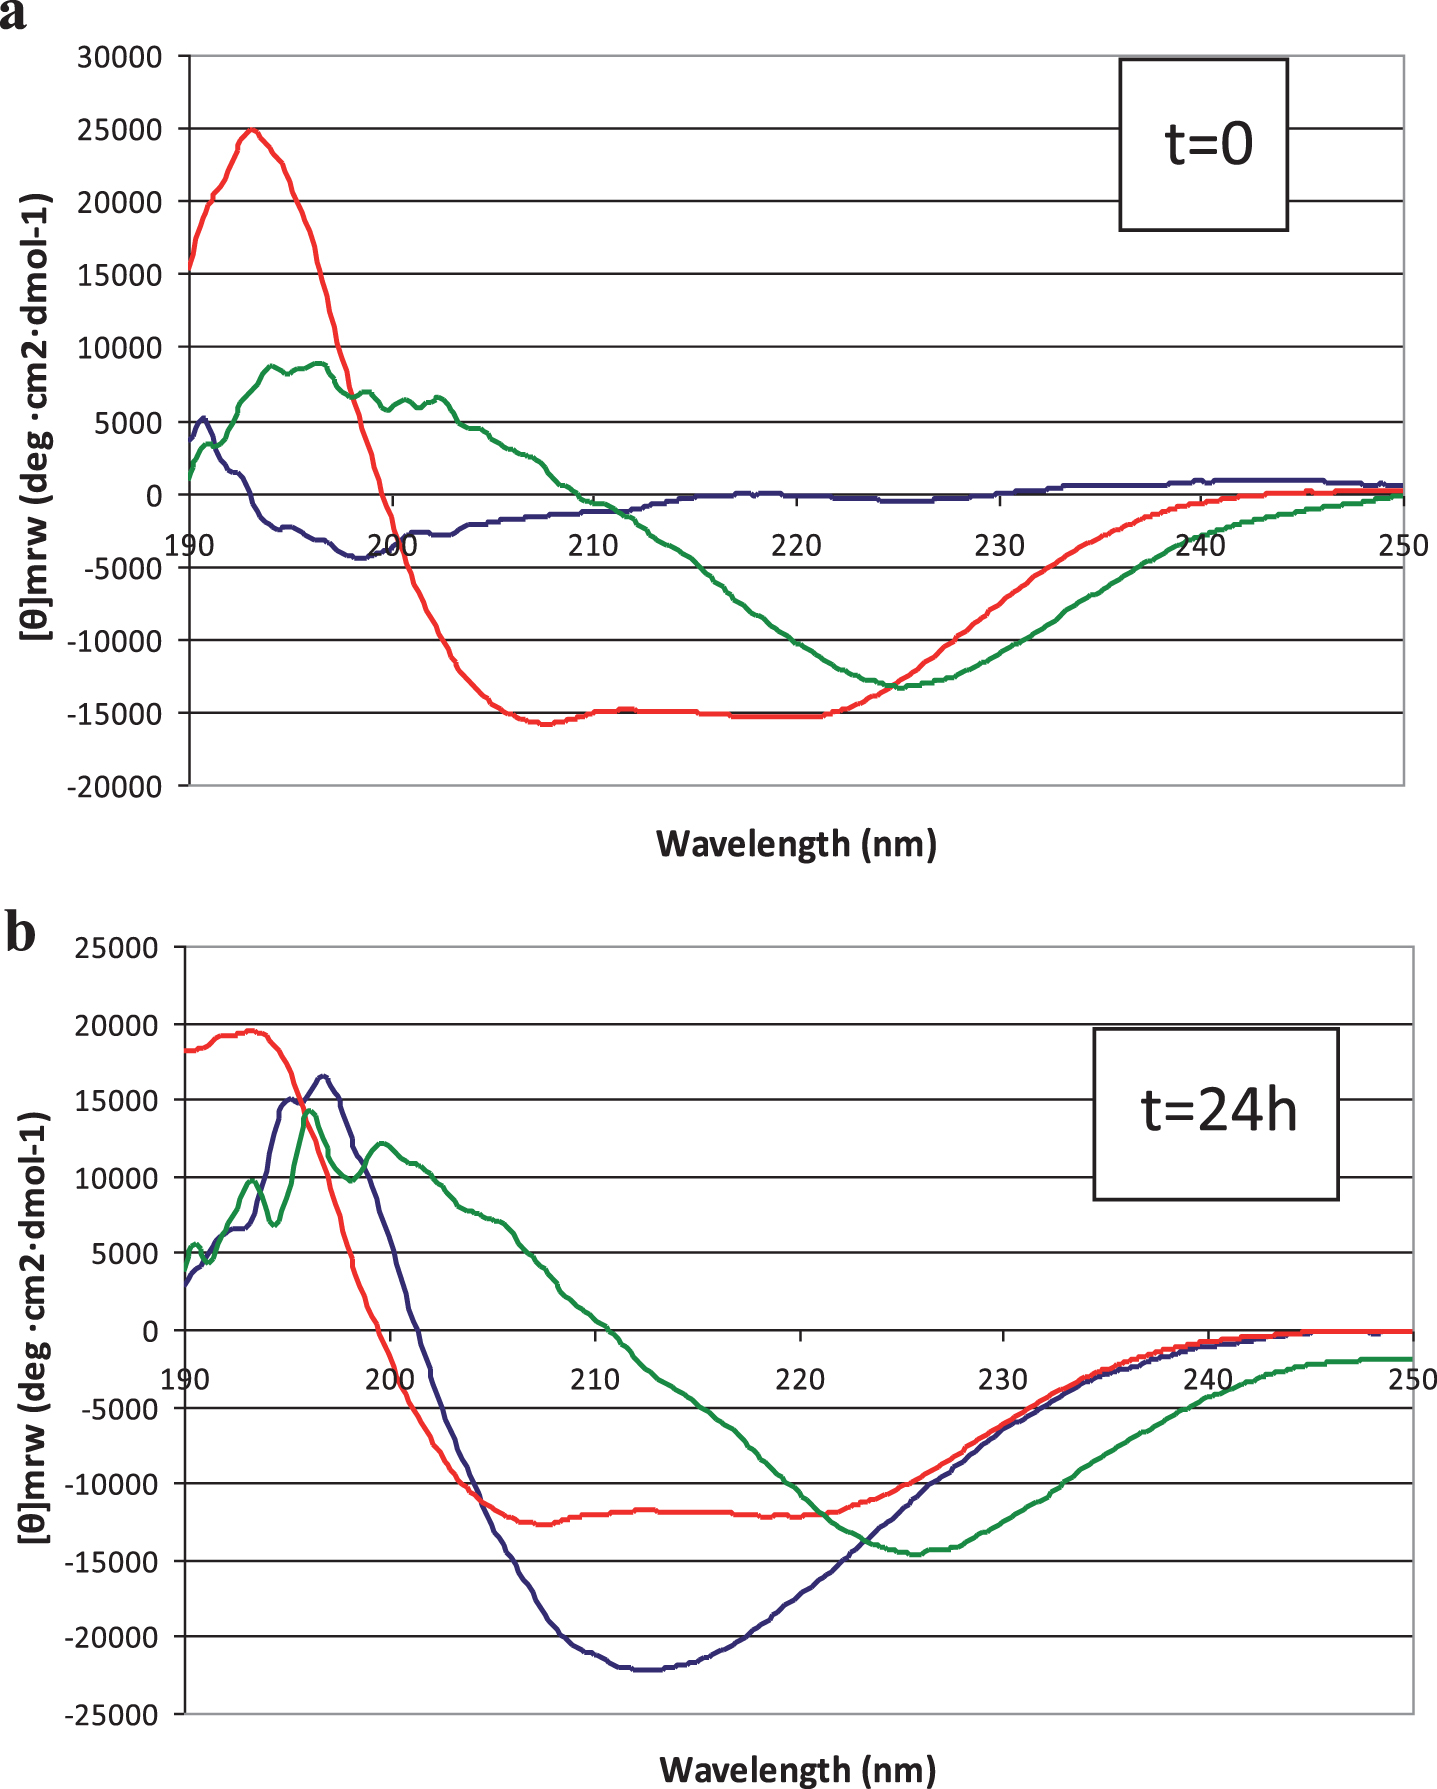 Circular dichroism spectra of peptide solutions, recorded at (a) t = 0 min and (b) t = 24 hours. Blue line: 50 μM Aβ42; red line: 50 μM LL-37; green line: 1:1 mixture.